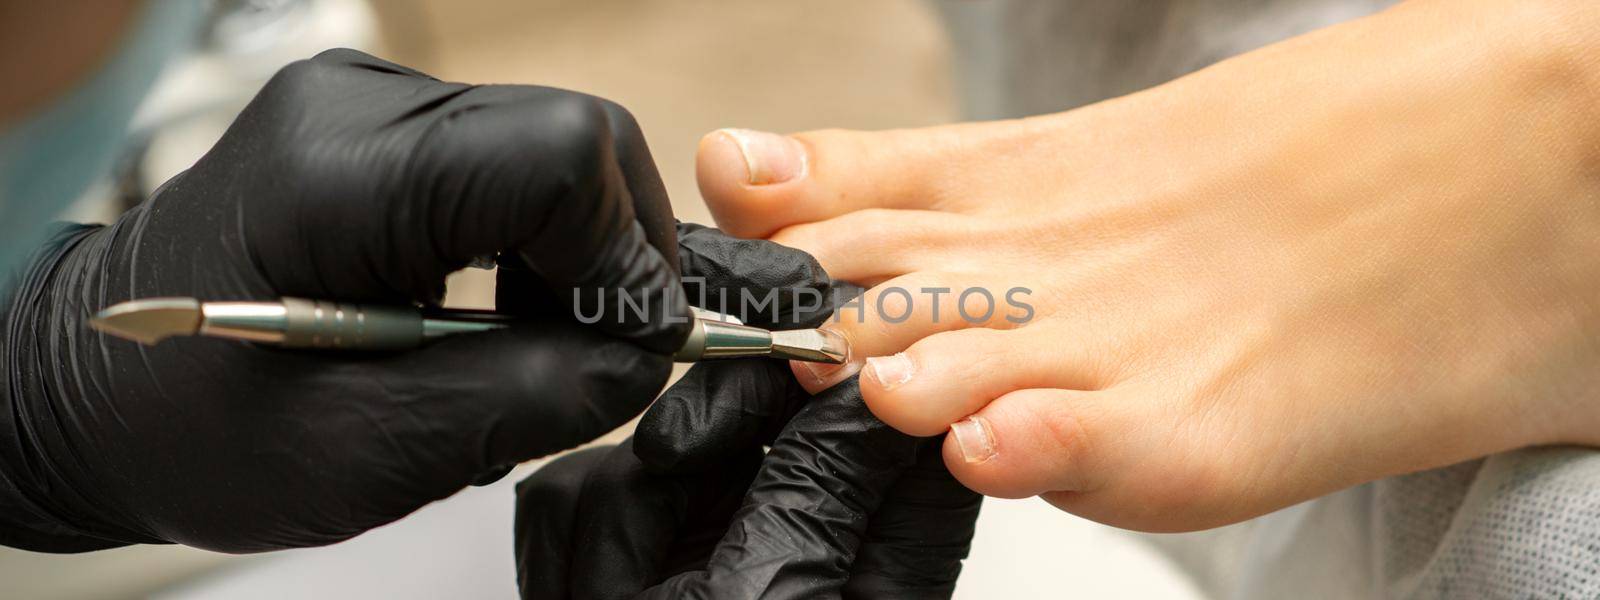 Cuticle Removal on Toes. Hands in black gloves of pedicure master remove cuticle on female toes by pusher. by okskukuruza